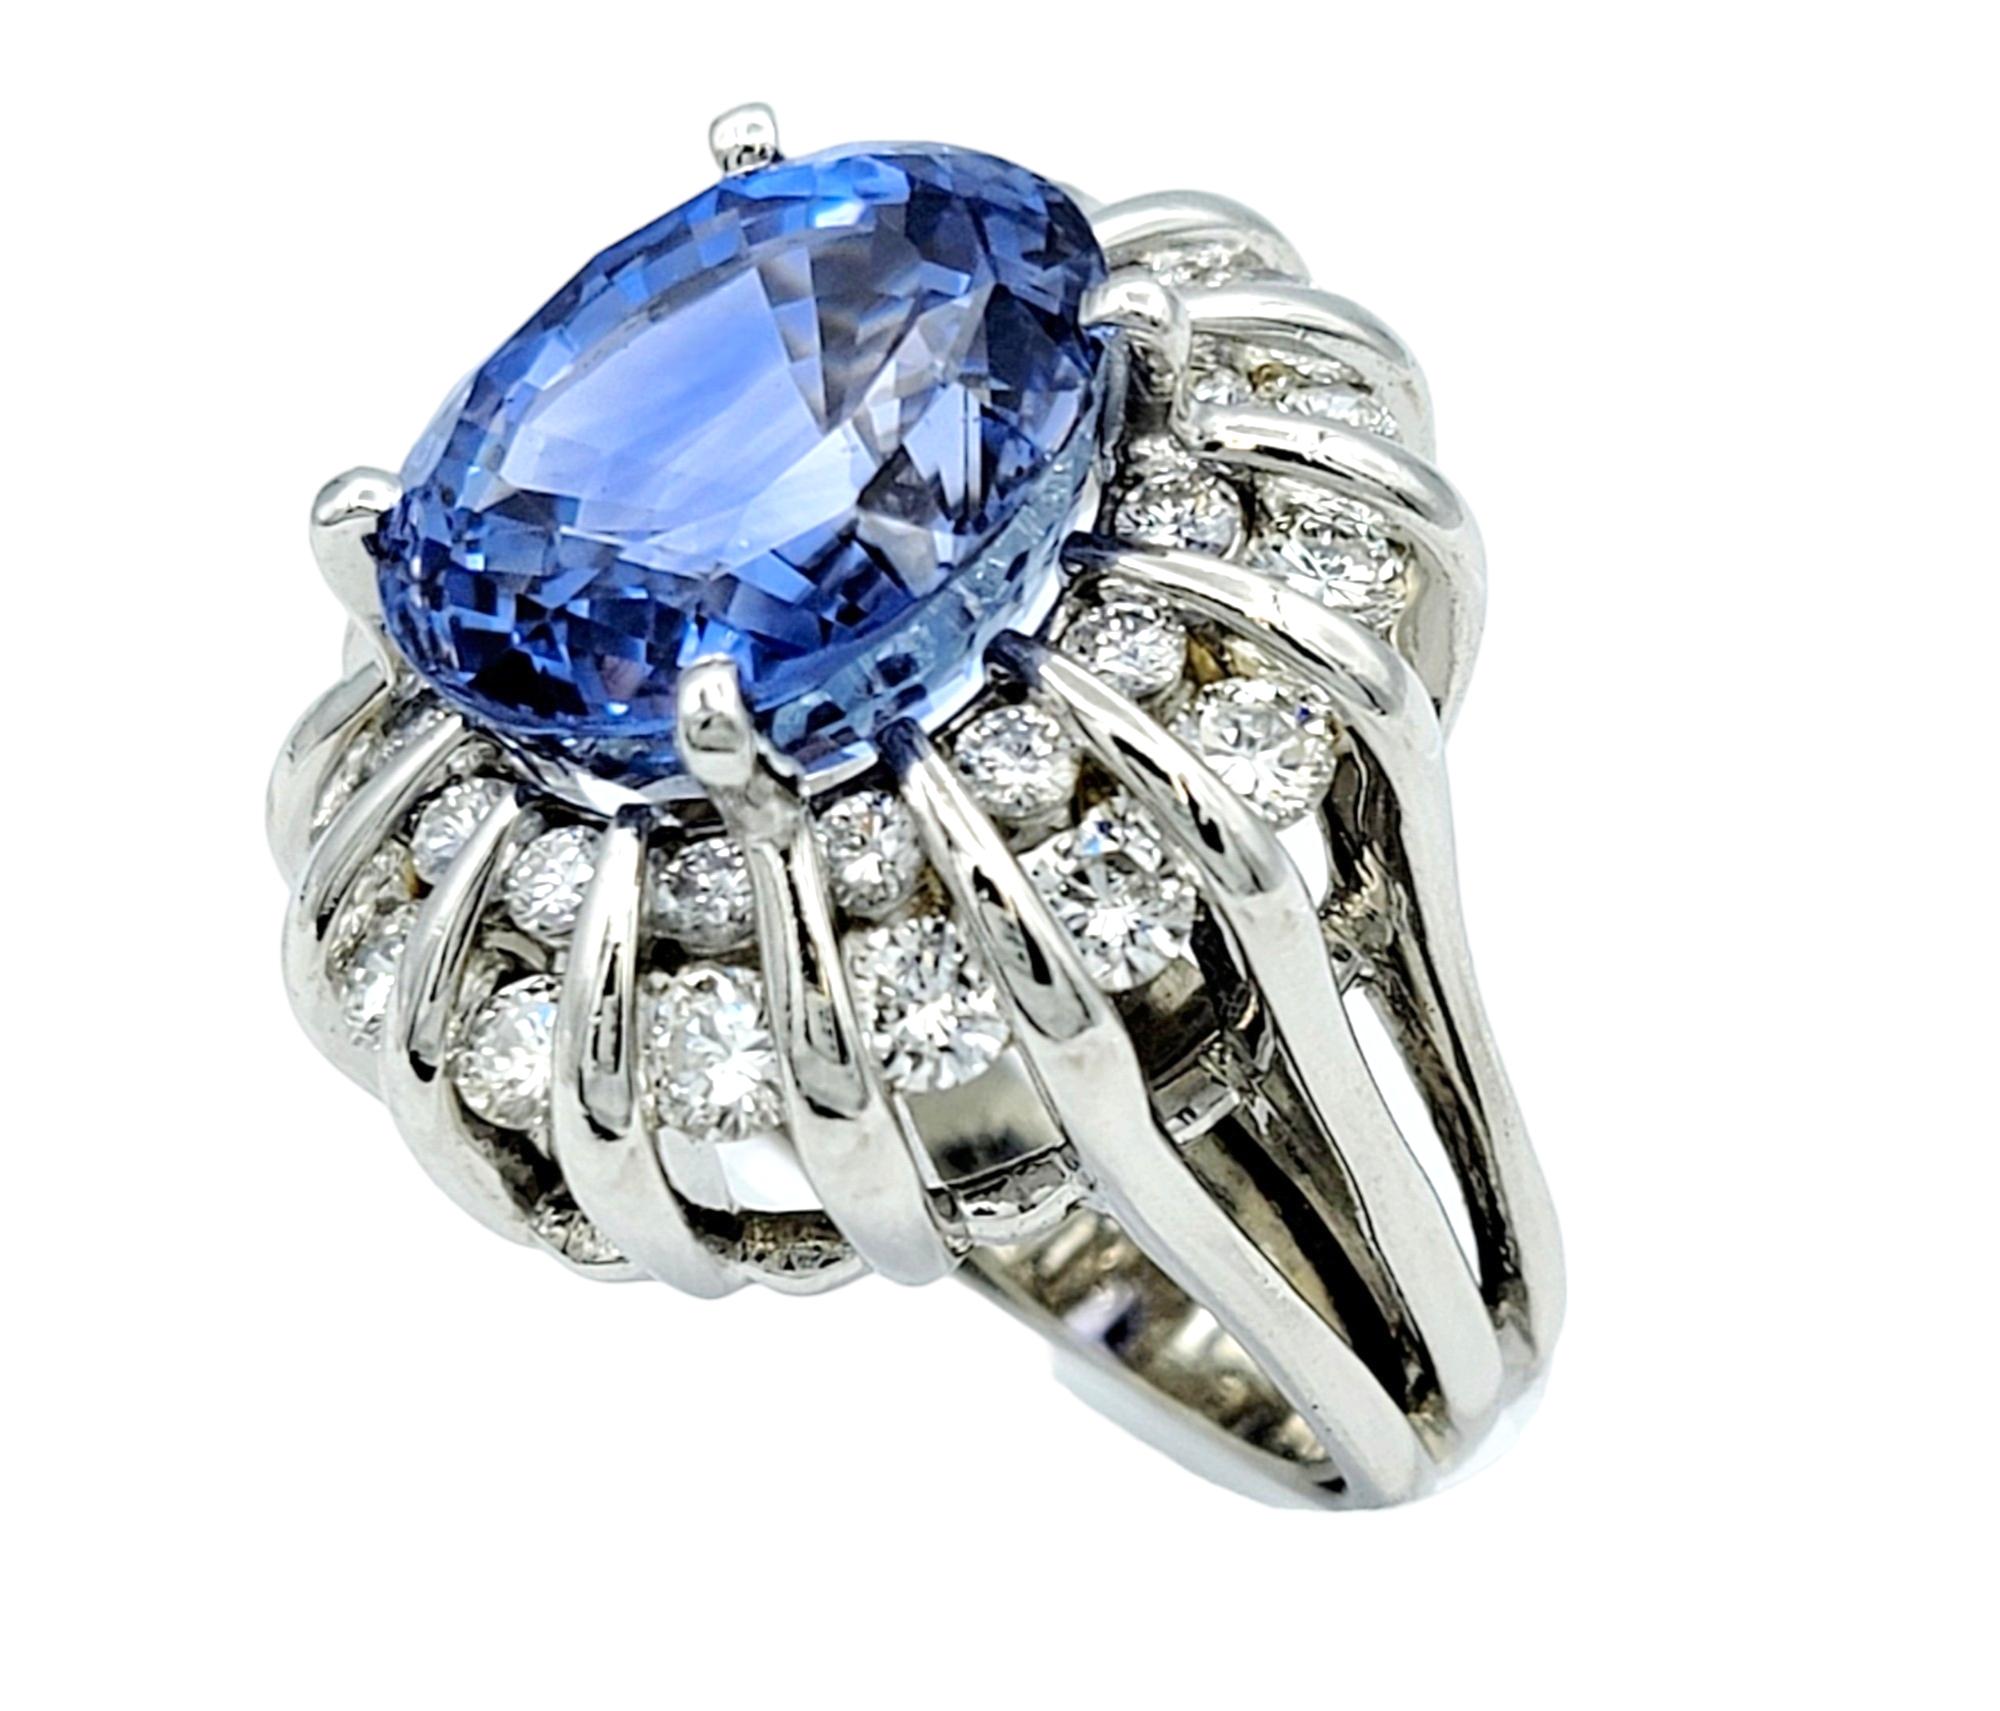 Women's Rare Untreated 16.27 Carat Oval Cut Ceylon Sapphire and Double Diamond Halo Ring For Sale